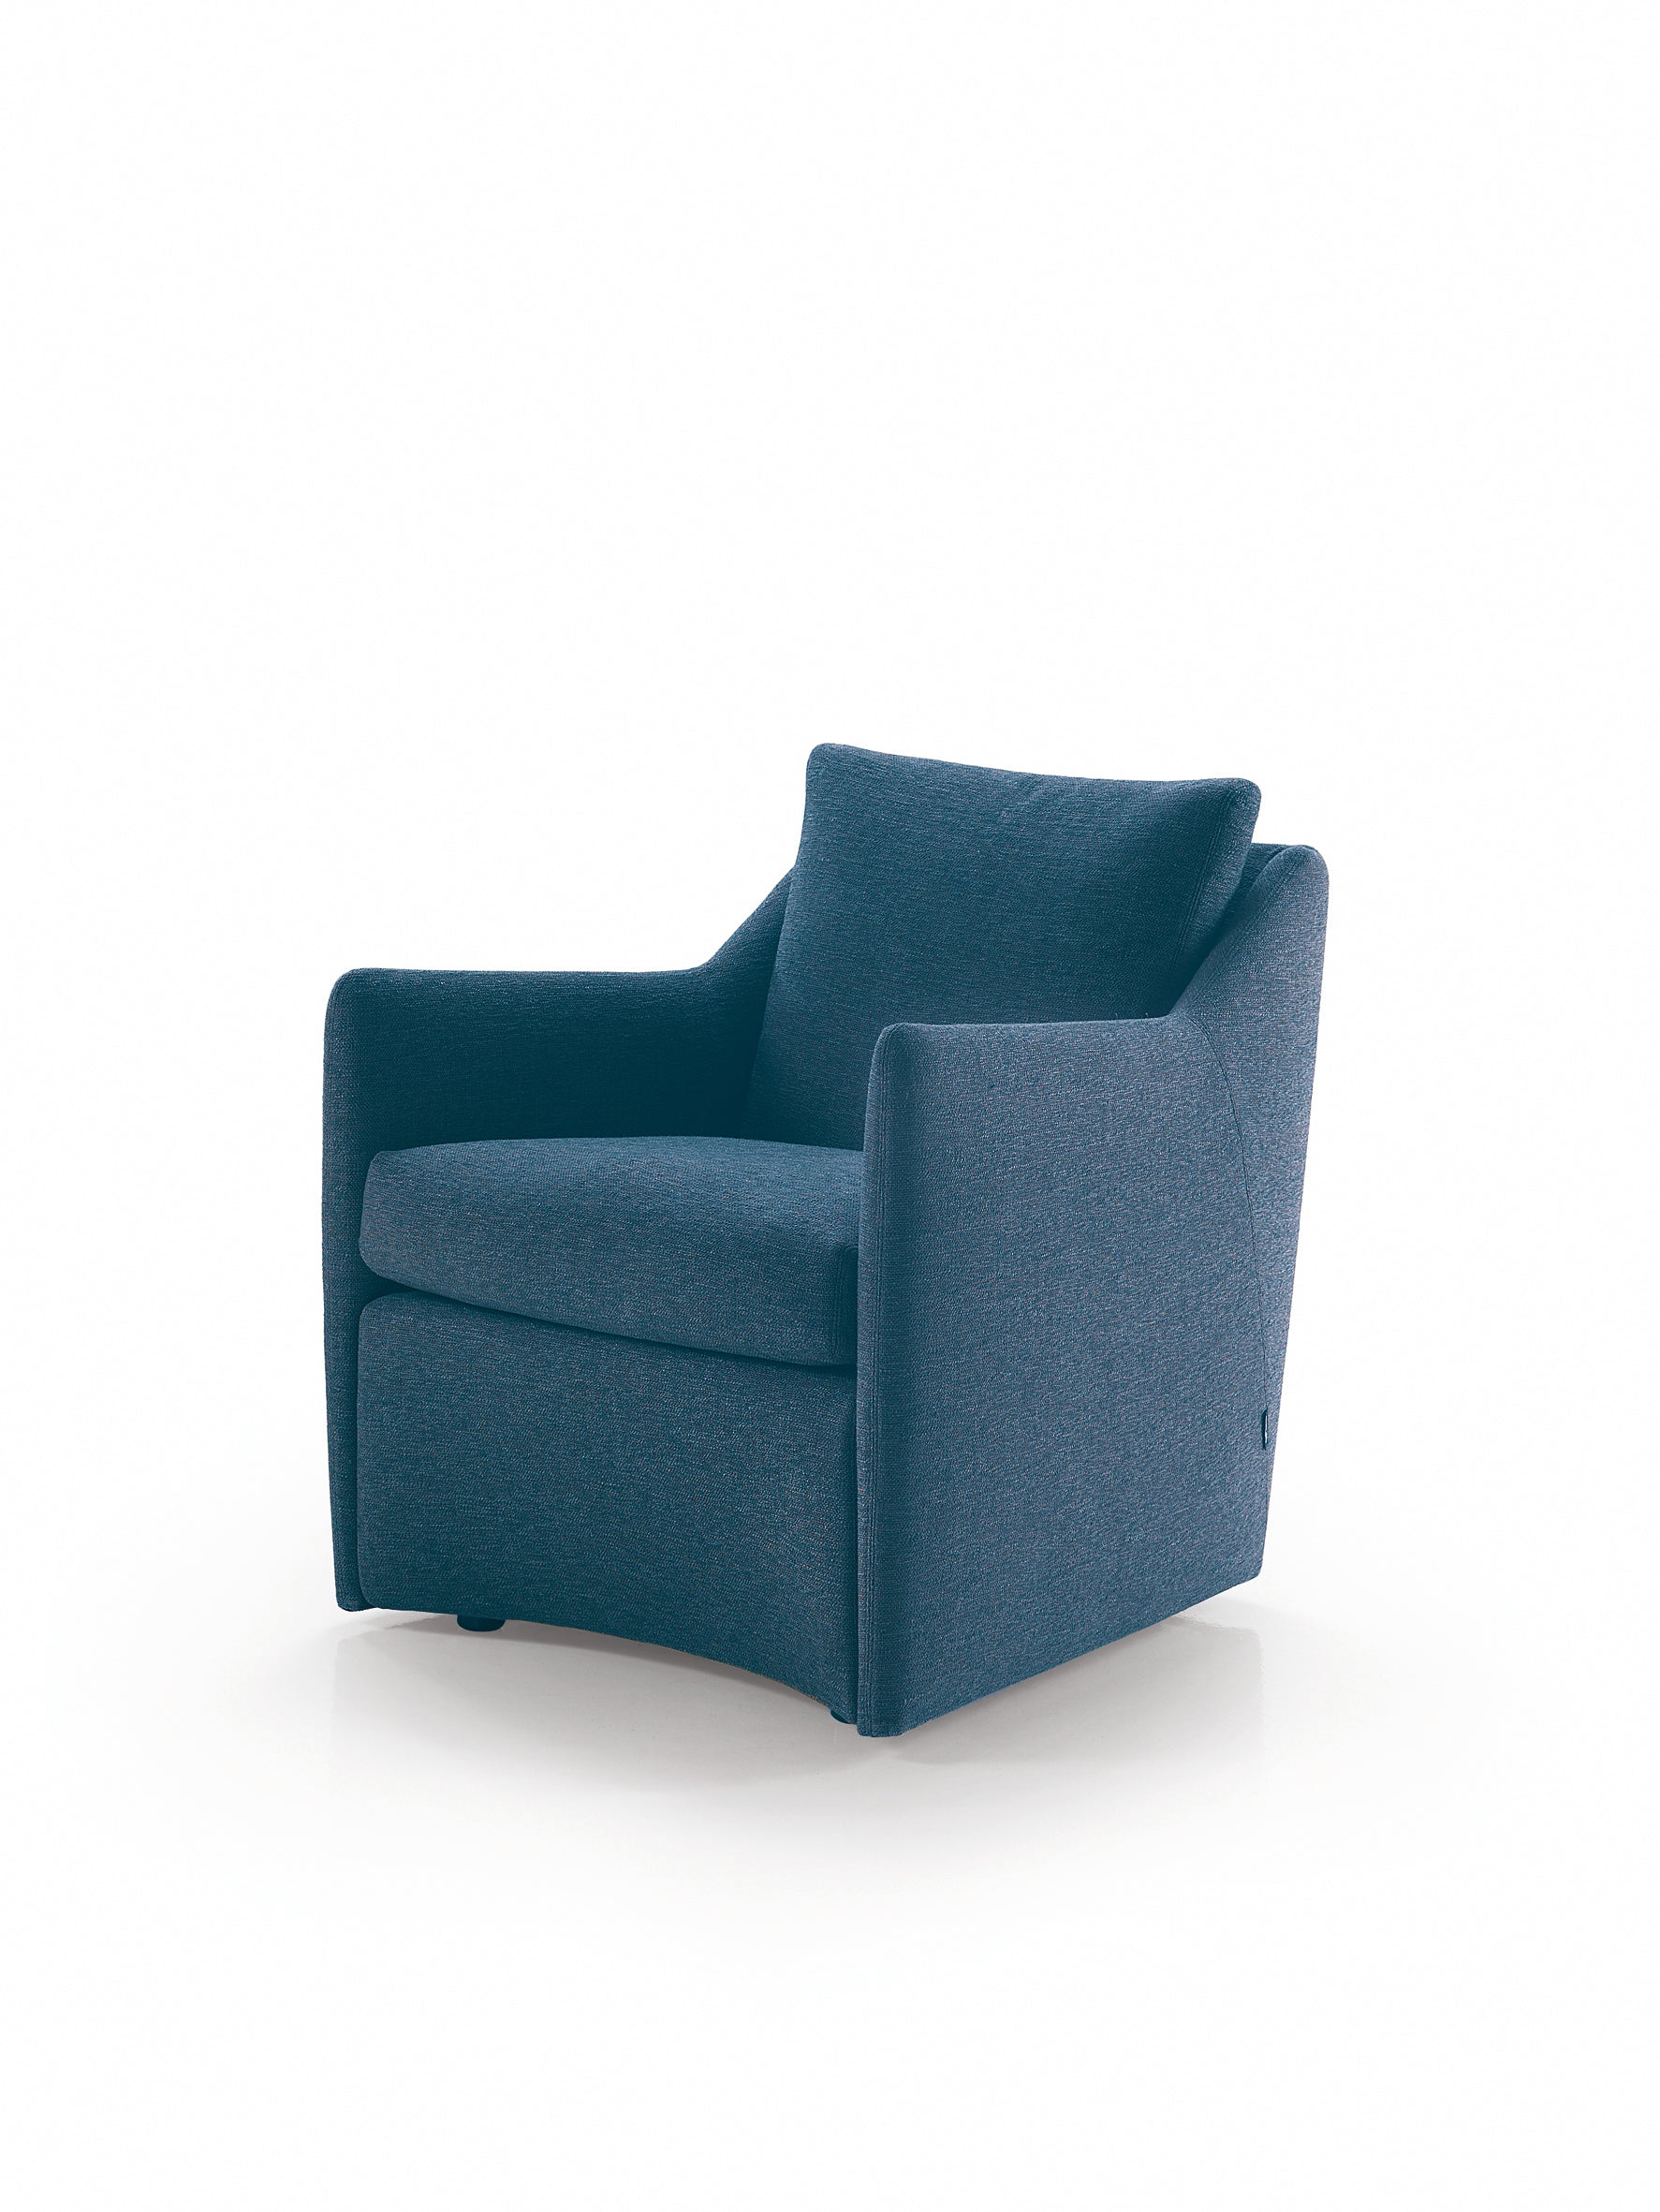 Small footprint armchair with swivel base.